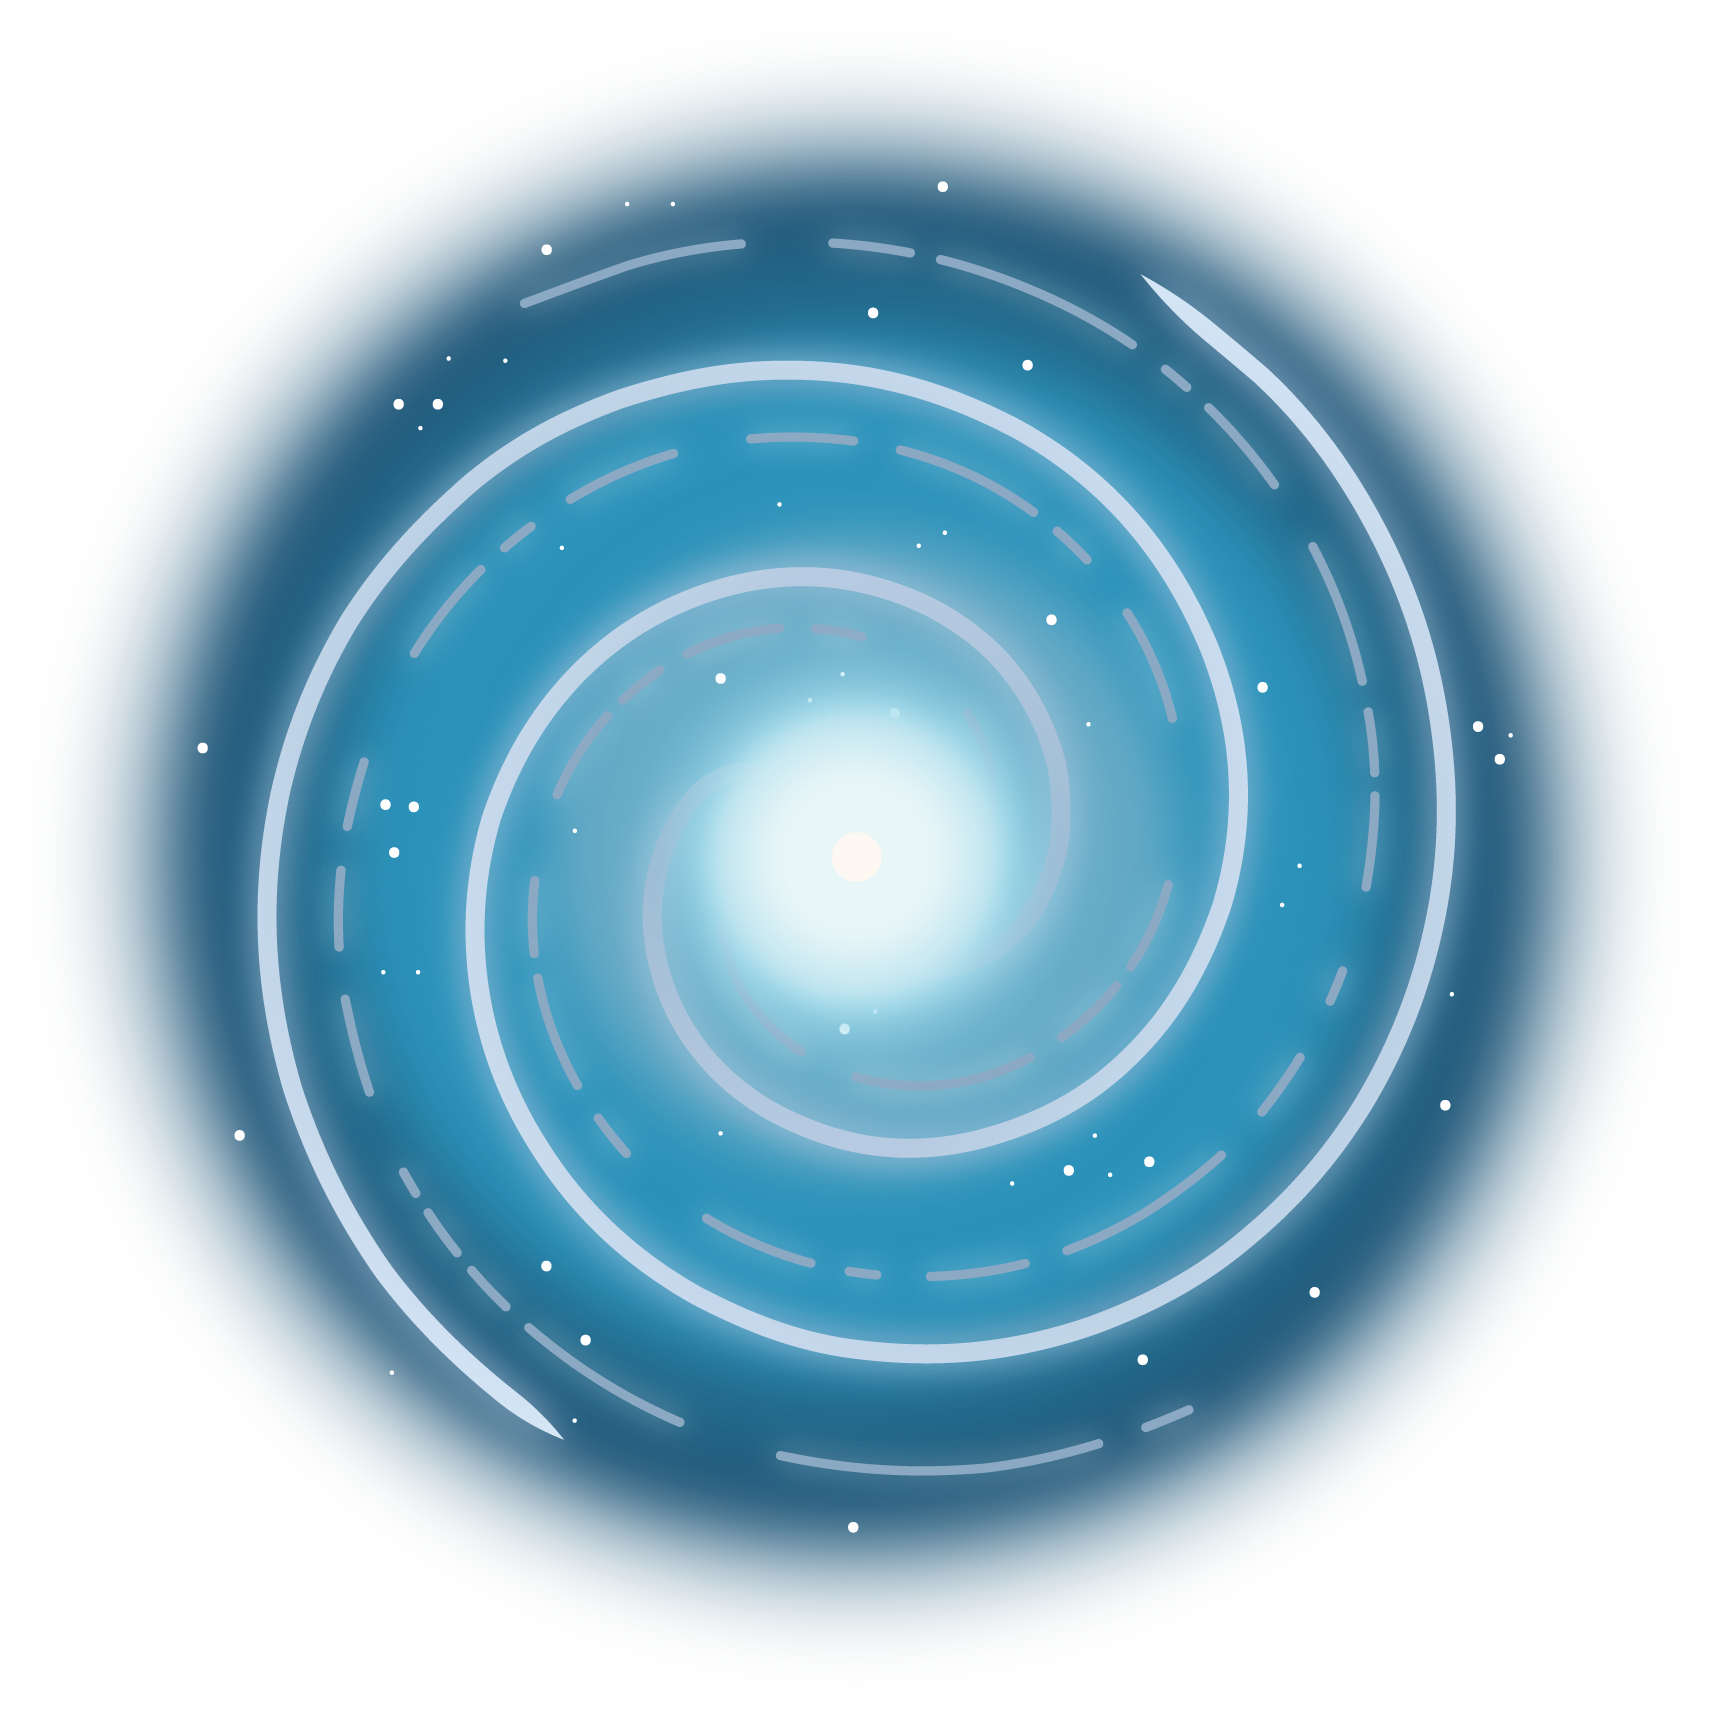 A hazy range of blues with darker blue around the edge makes up the base of this swirling spiral of white lines twirling inward toward a white cloud with a white spot in the center. White dots representing stars speckle the image.